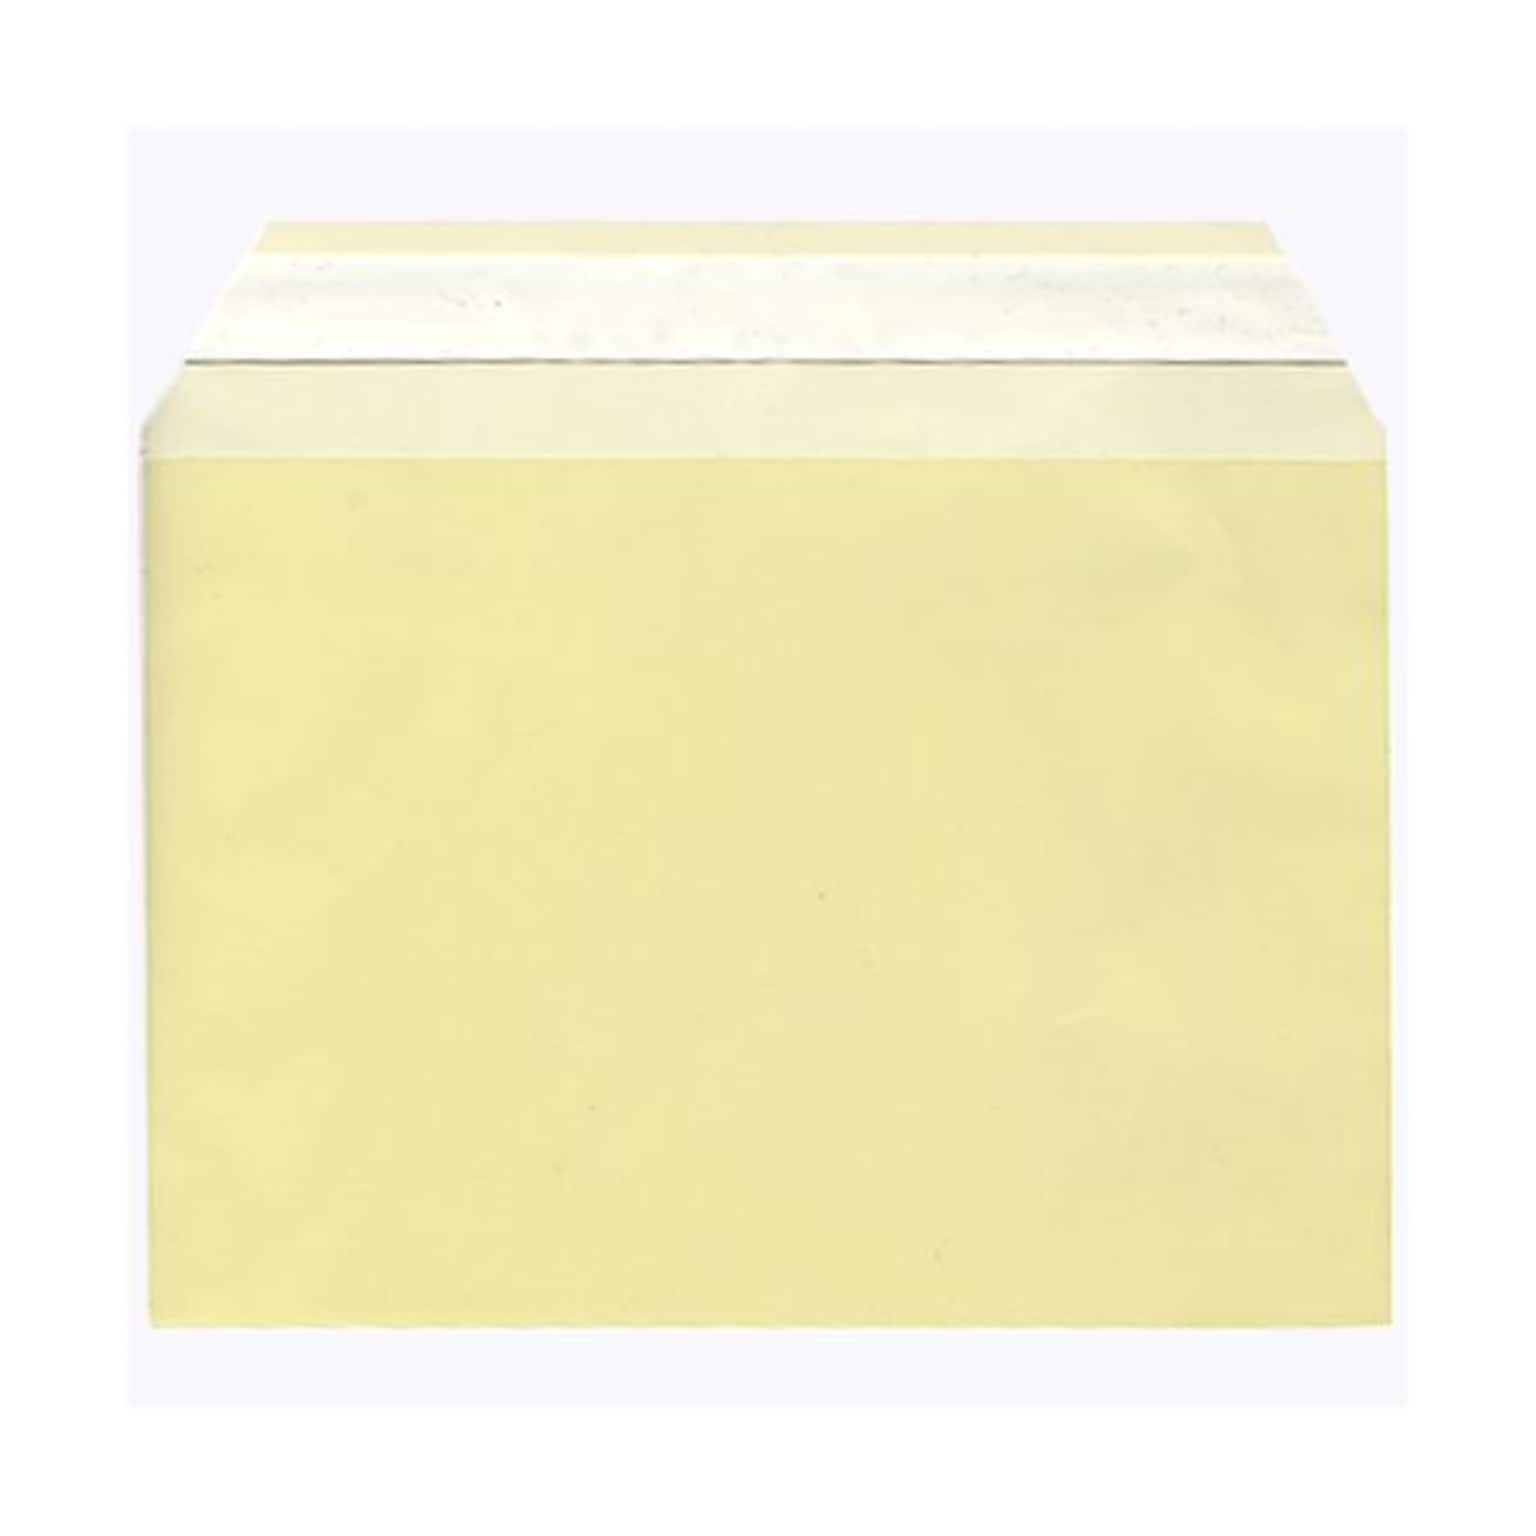 JAM Paper Cello Sleeves with Peel & Seal Closure, 5.0625 x 7.1875, Yellow, 100/Pack (2783139)